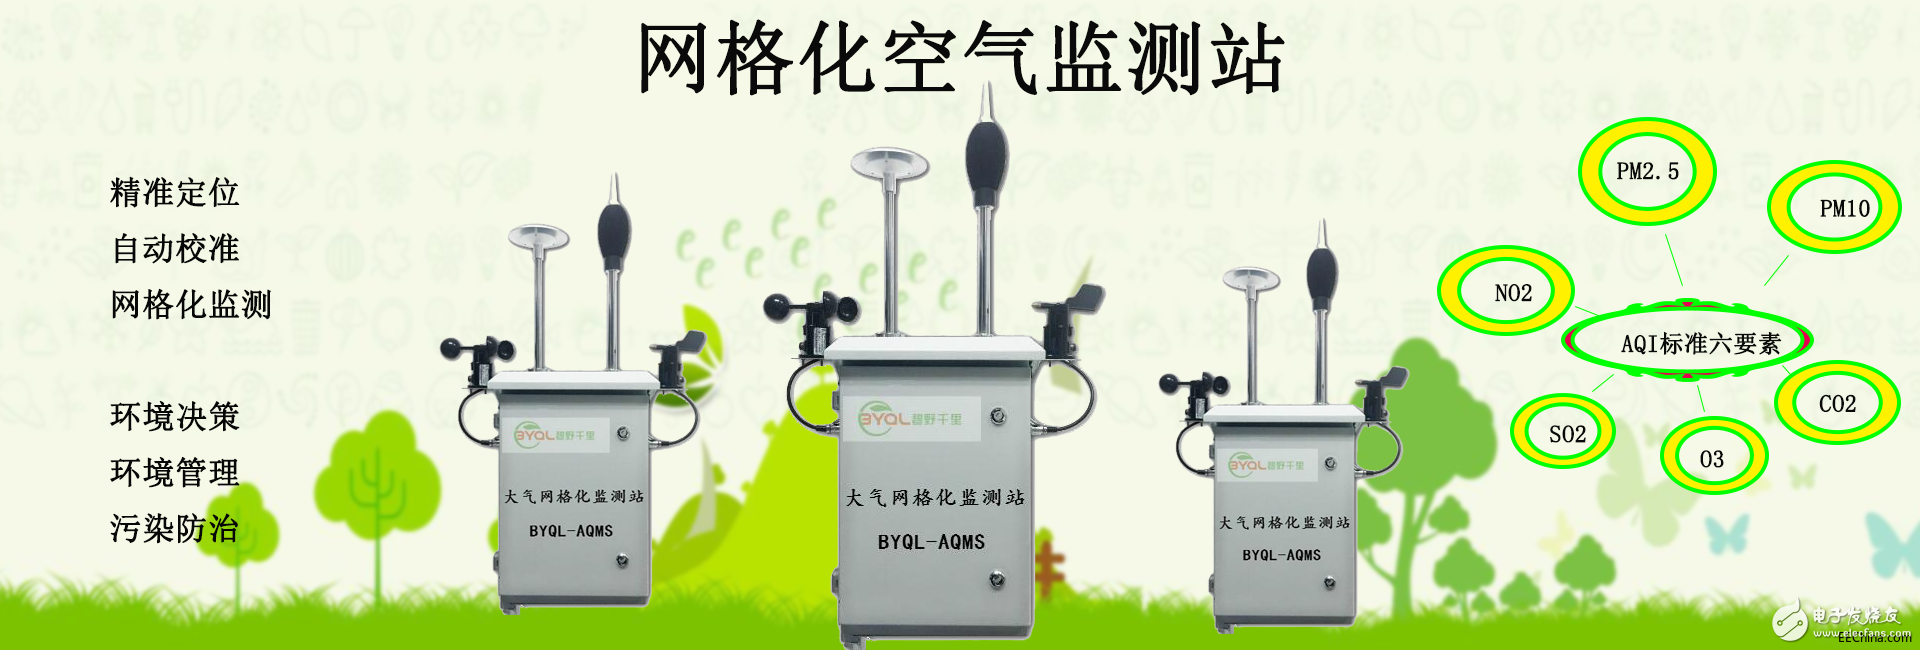 Introduction to Urban Grid Air Environment Monitoring System